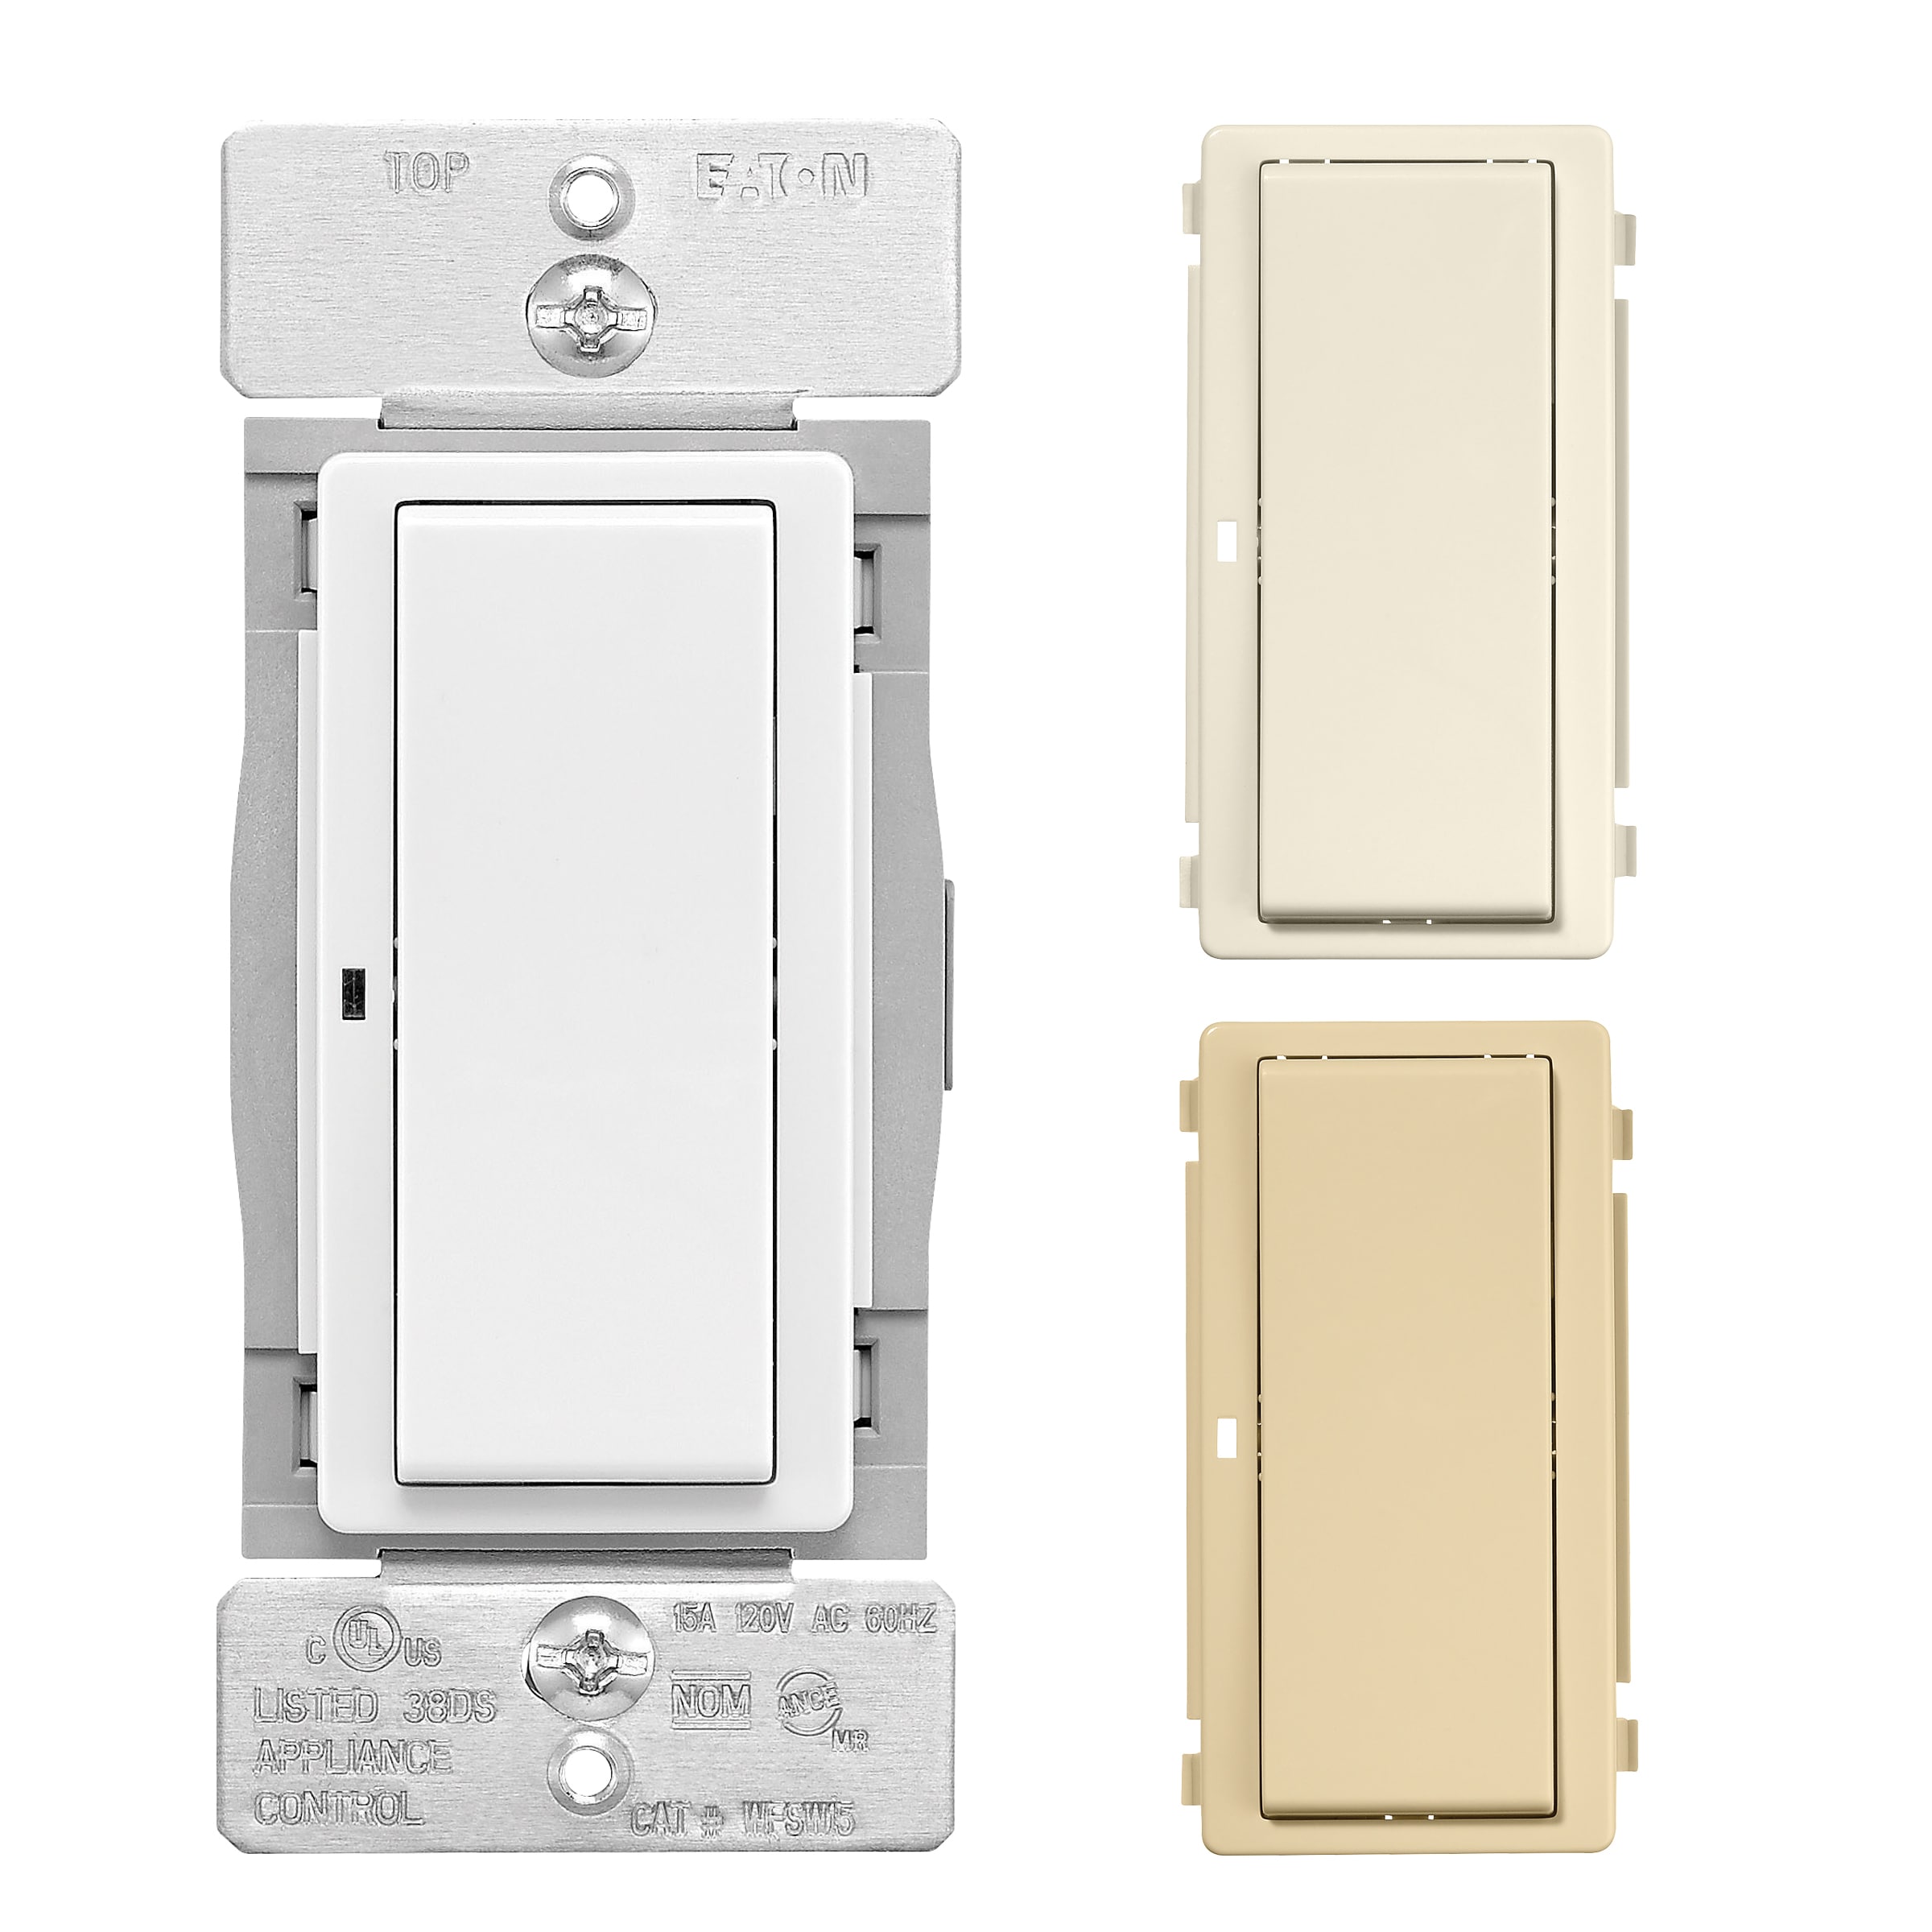 Commercial Electric 15 Amp Single-Pole White Smart Light Switch